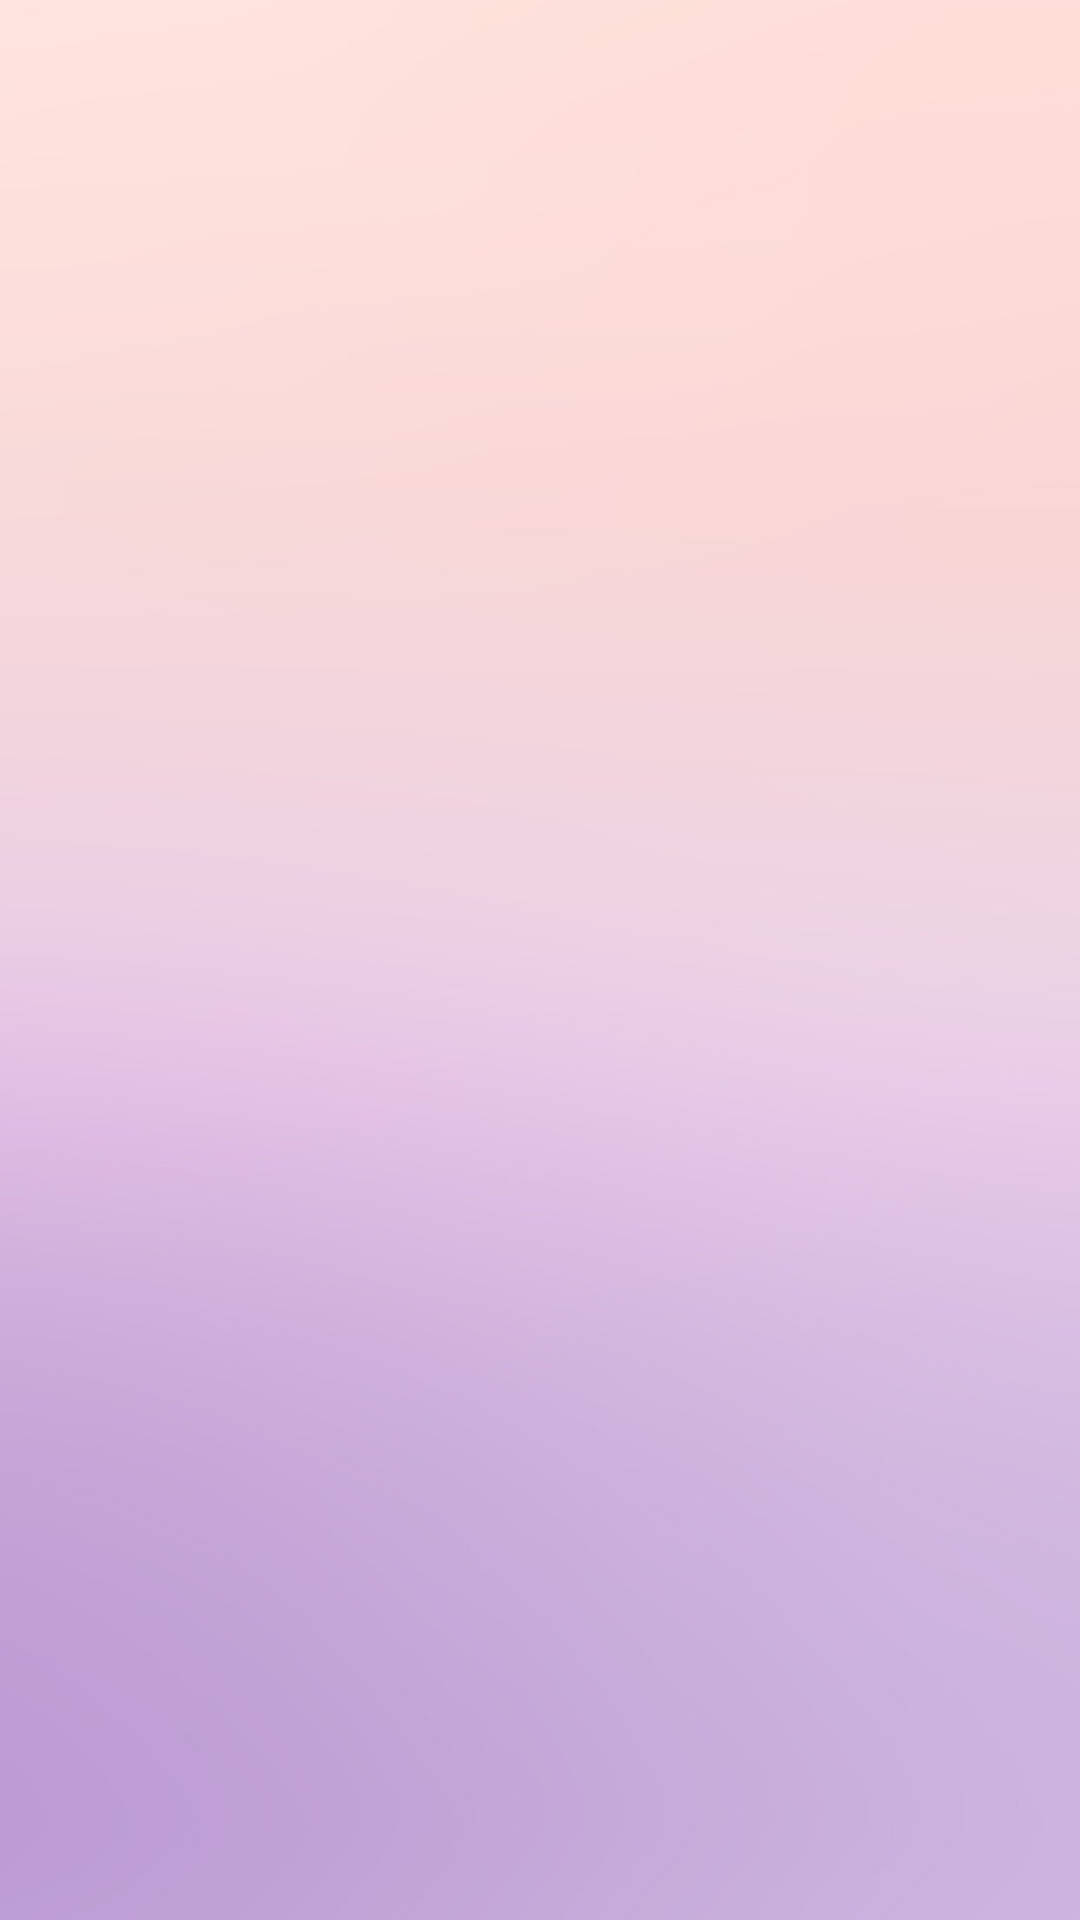 Blurred Text Background With Pastel Colors And Soft Light. Gray, Pink,  Purple, Muted. Modern Trend. Copy Space. Diagonal Line. Graphic; Nightlife;  Concert Stock Photo, Picture and Royalty Free Image. Image 148568263.